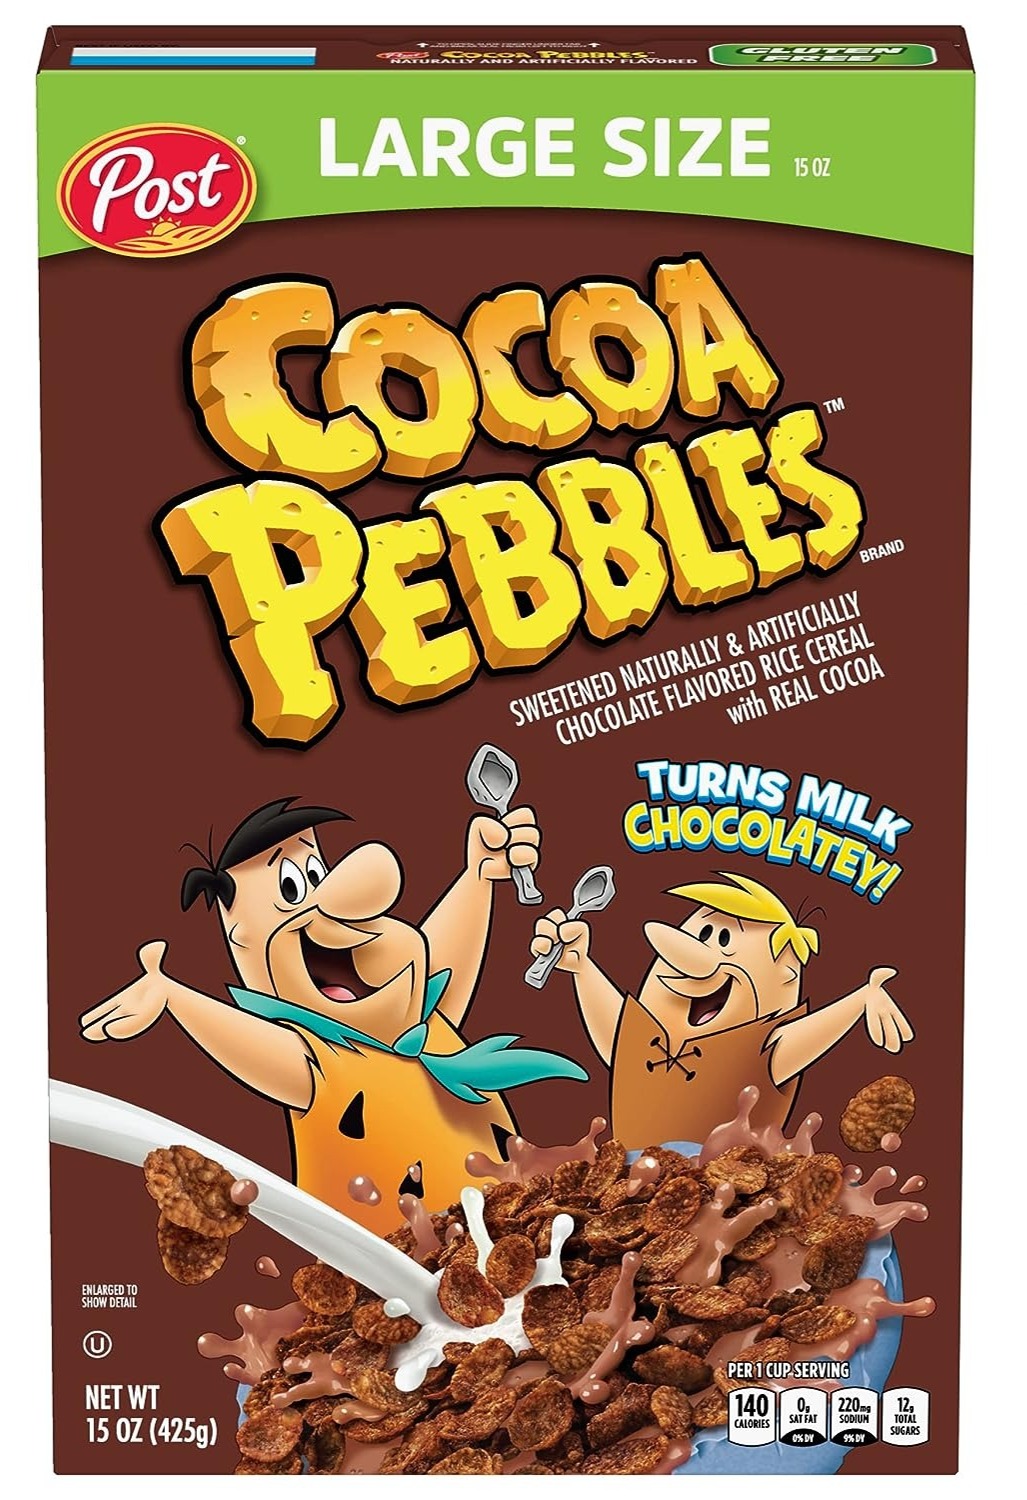 Pebbles Cocoa PEBBLES Cereal, Chocolatey Kids Cereal, Gluten Free Rice Cereal, 15 OZ Large Size Cereal Box - $2.71